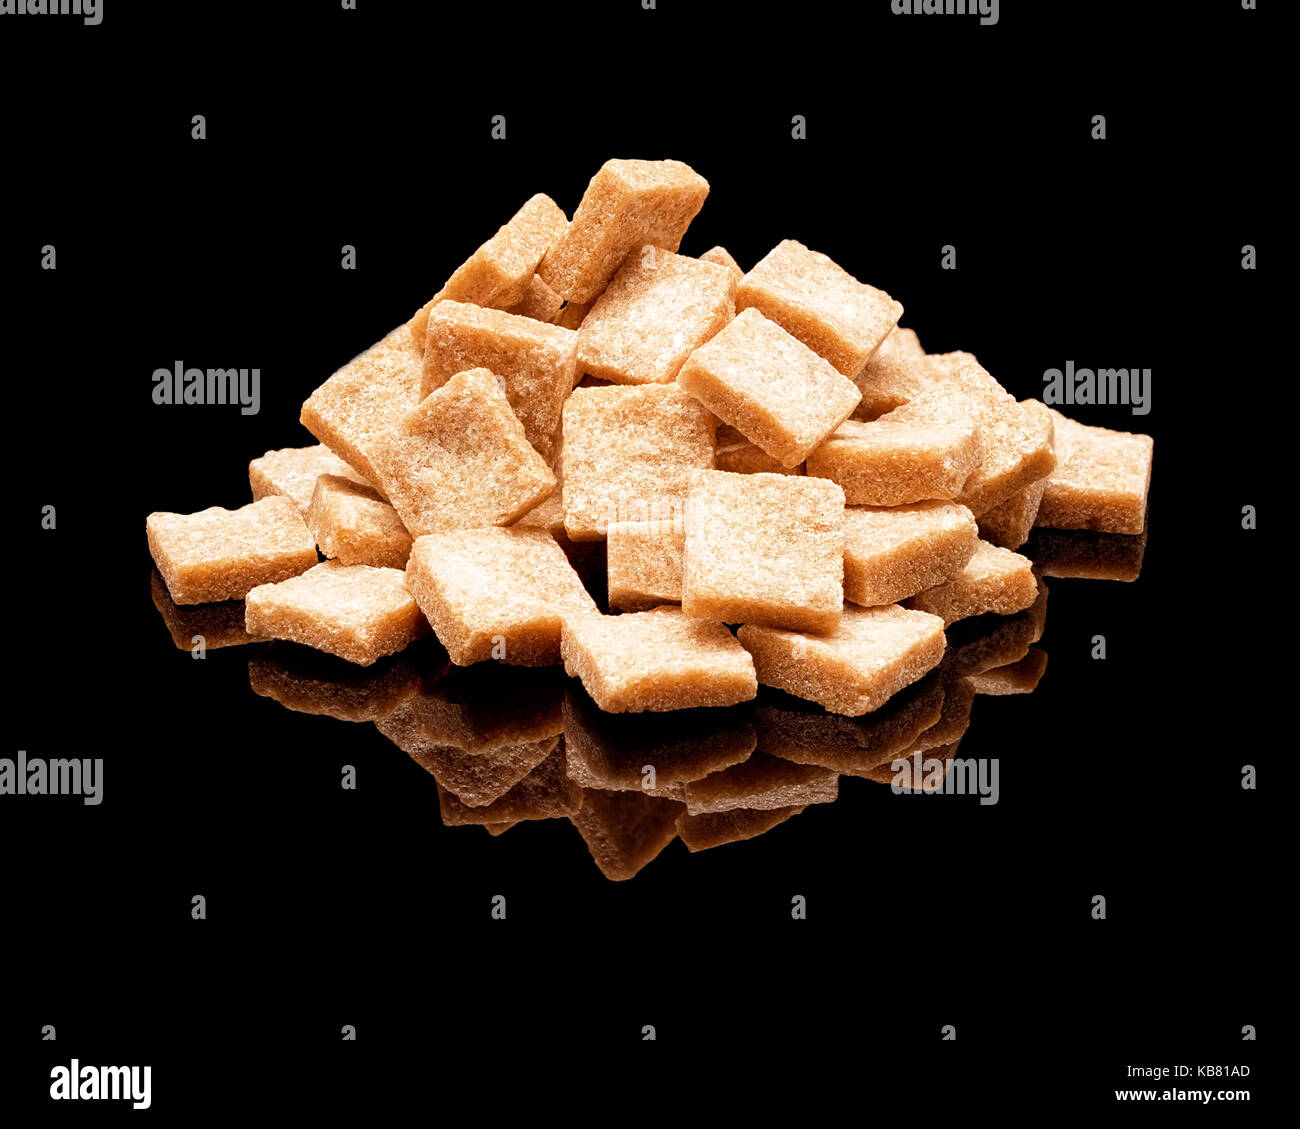 Pile of lumpy brown cane sugar with real reflection on a black glossy background Stock Photo